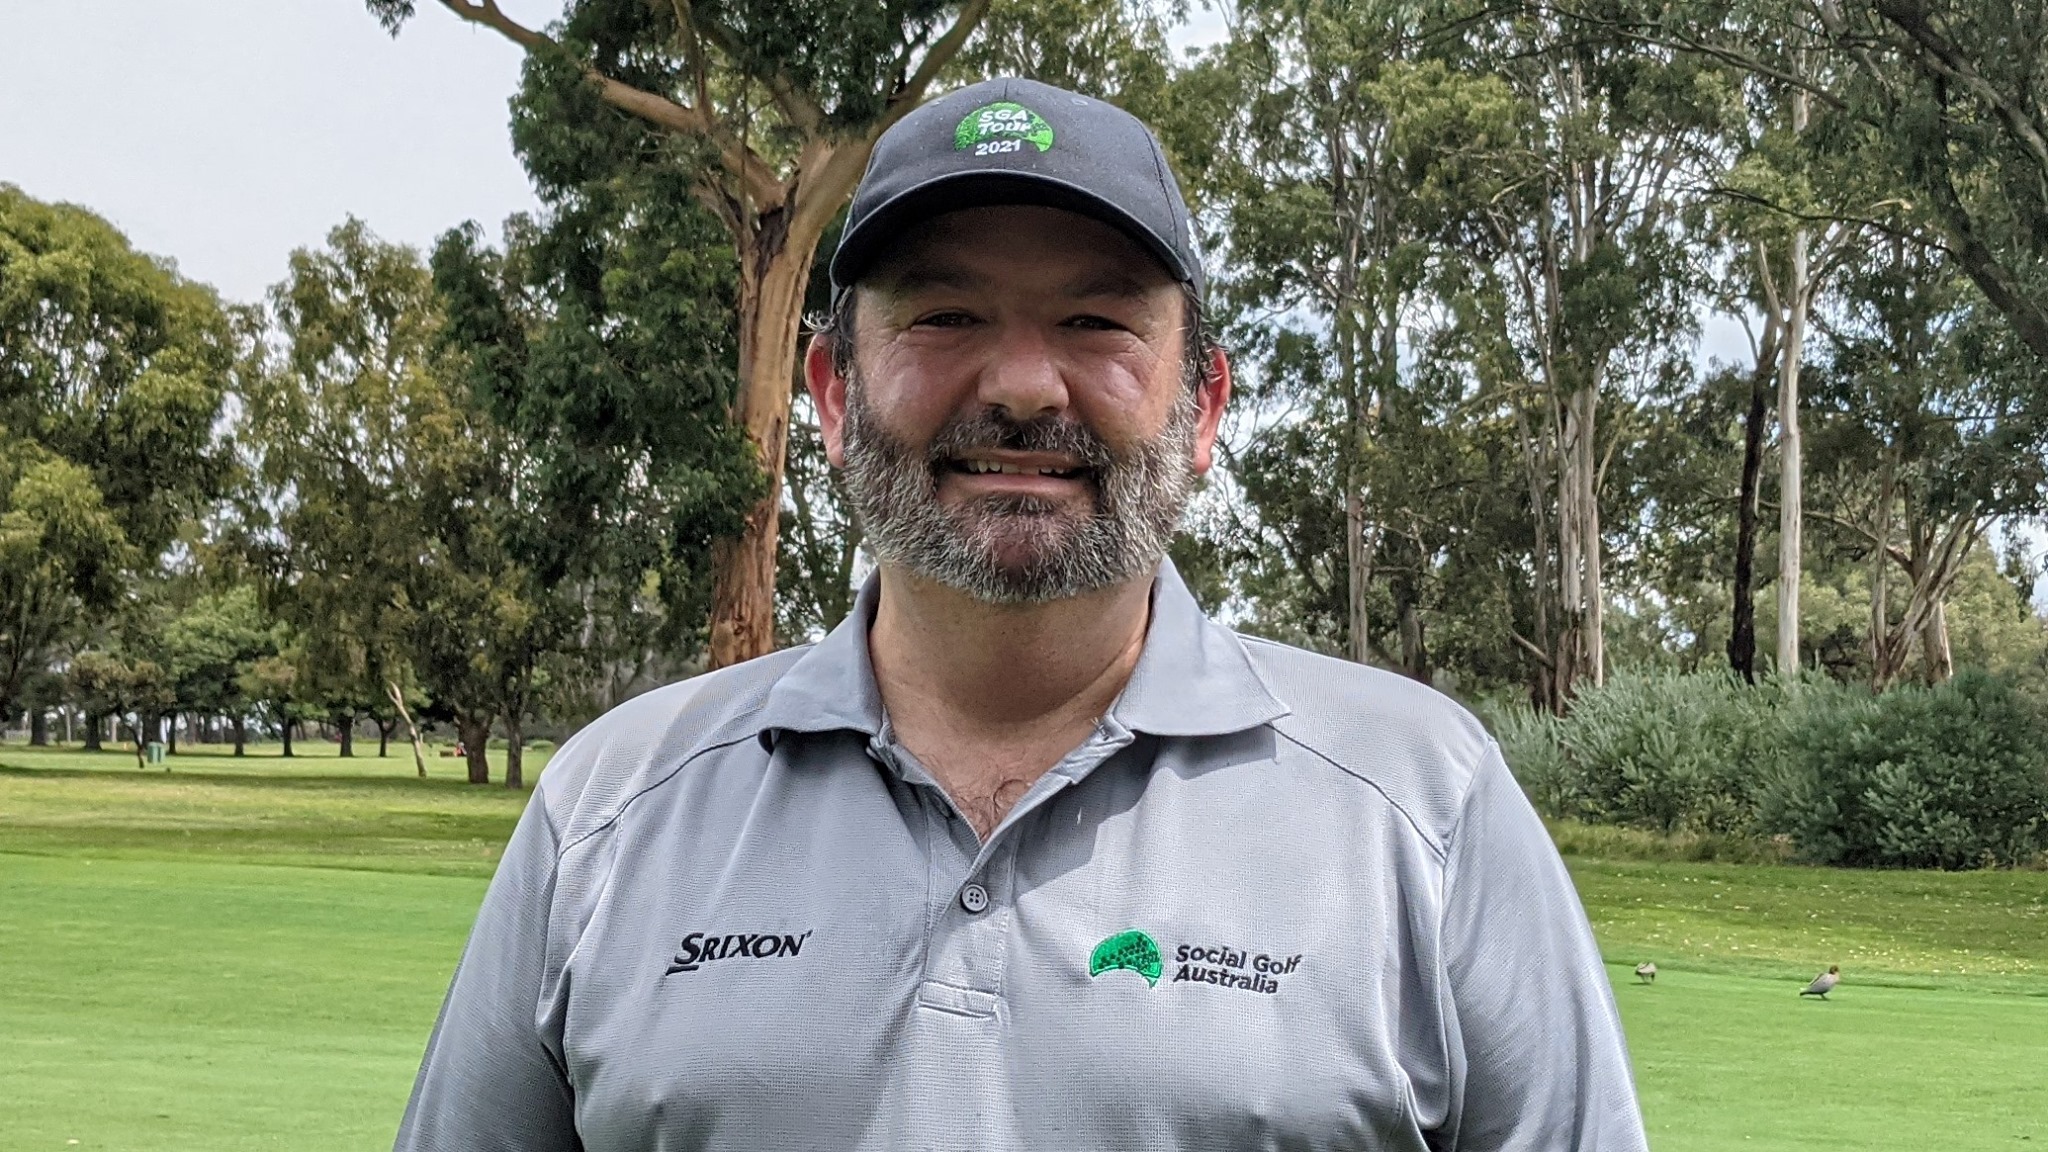 Golf Industry Veteran Fellner set to grow the game in new Social Golf  Australia role | Golf Industry Central